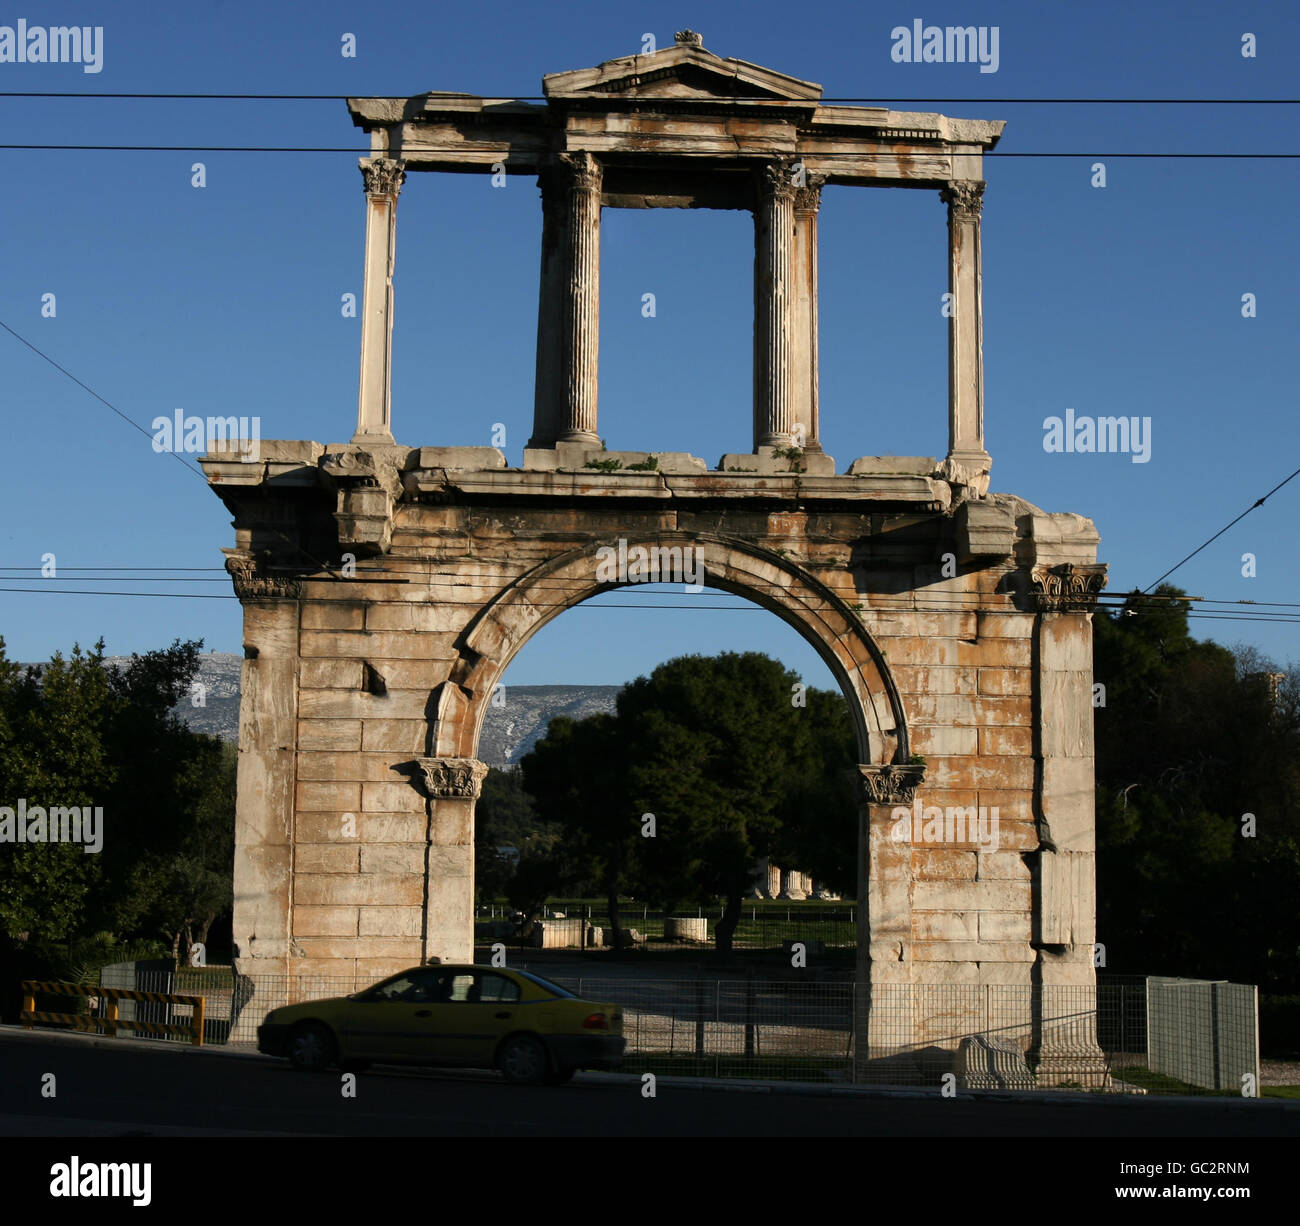 General view of The Temple of Olympian Zeus from the busy main road Stock Photo